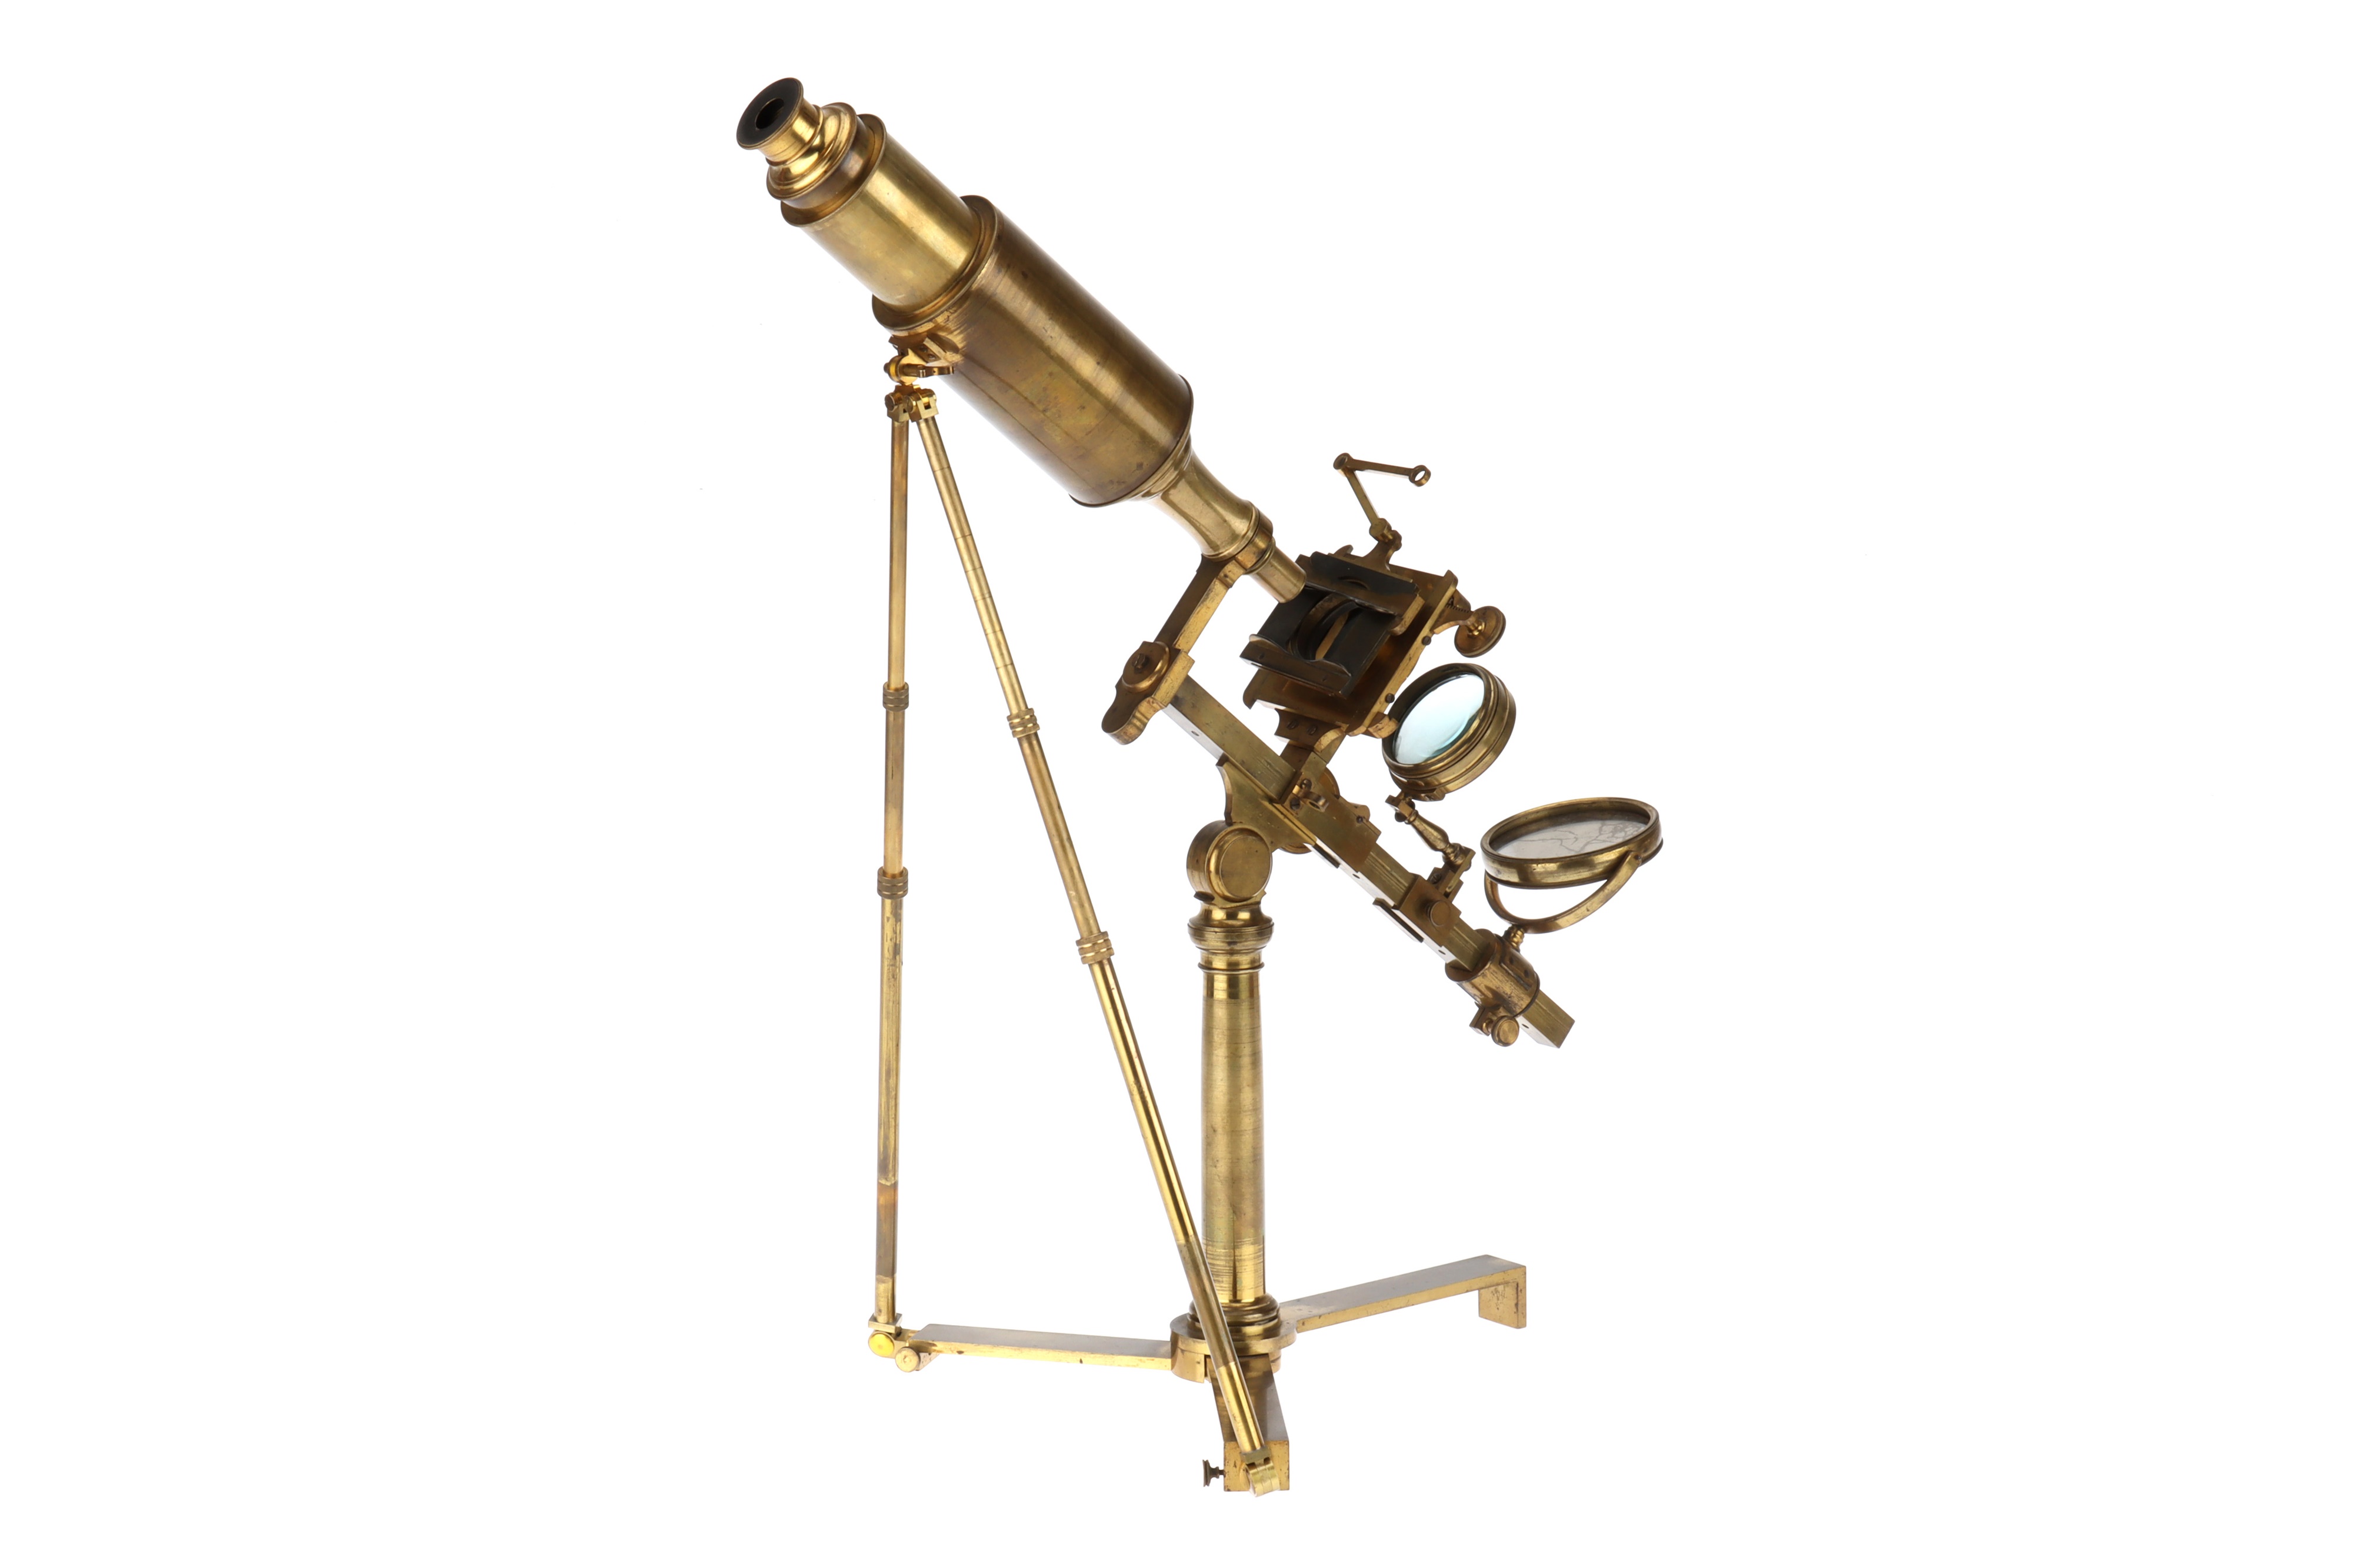 A Large & Very Early Achromatic Microscope Attributed to Tully, - Image 2 of 4